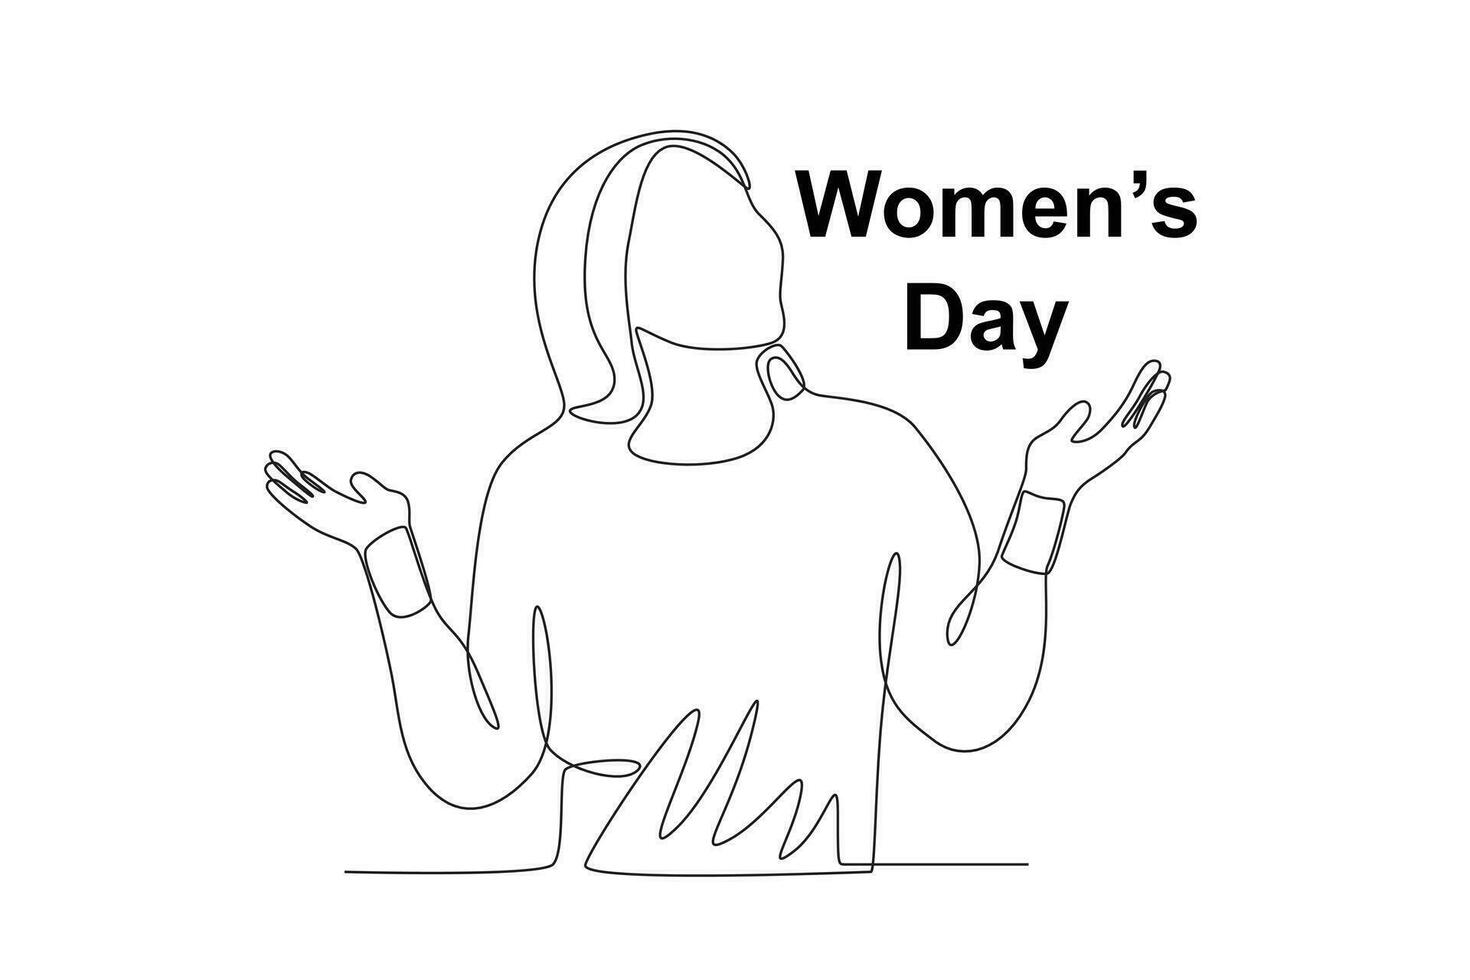 A happy woman welcomes women's day vector